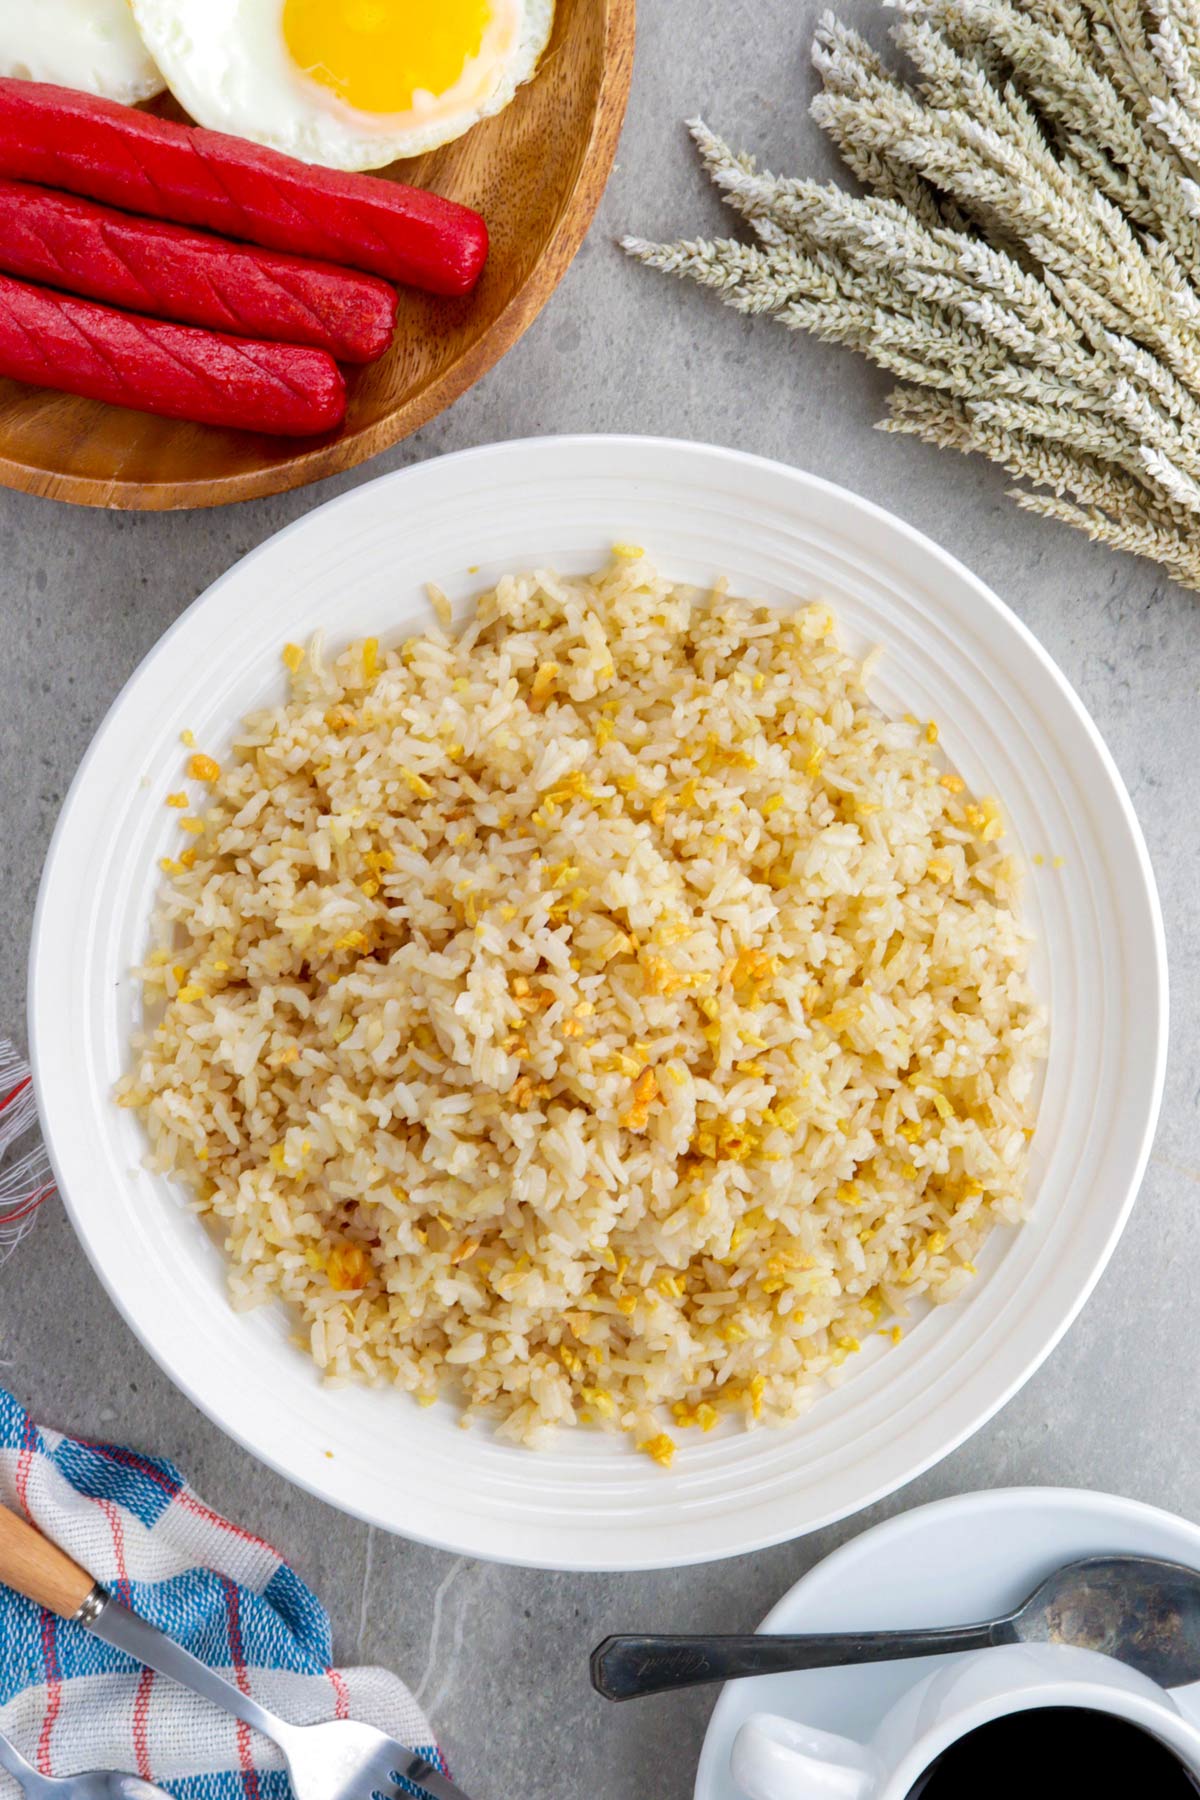 Sinangag or the Filipino fried rice is loaded with garlic.